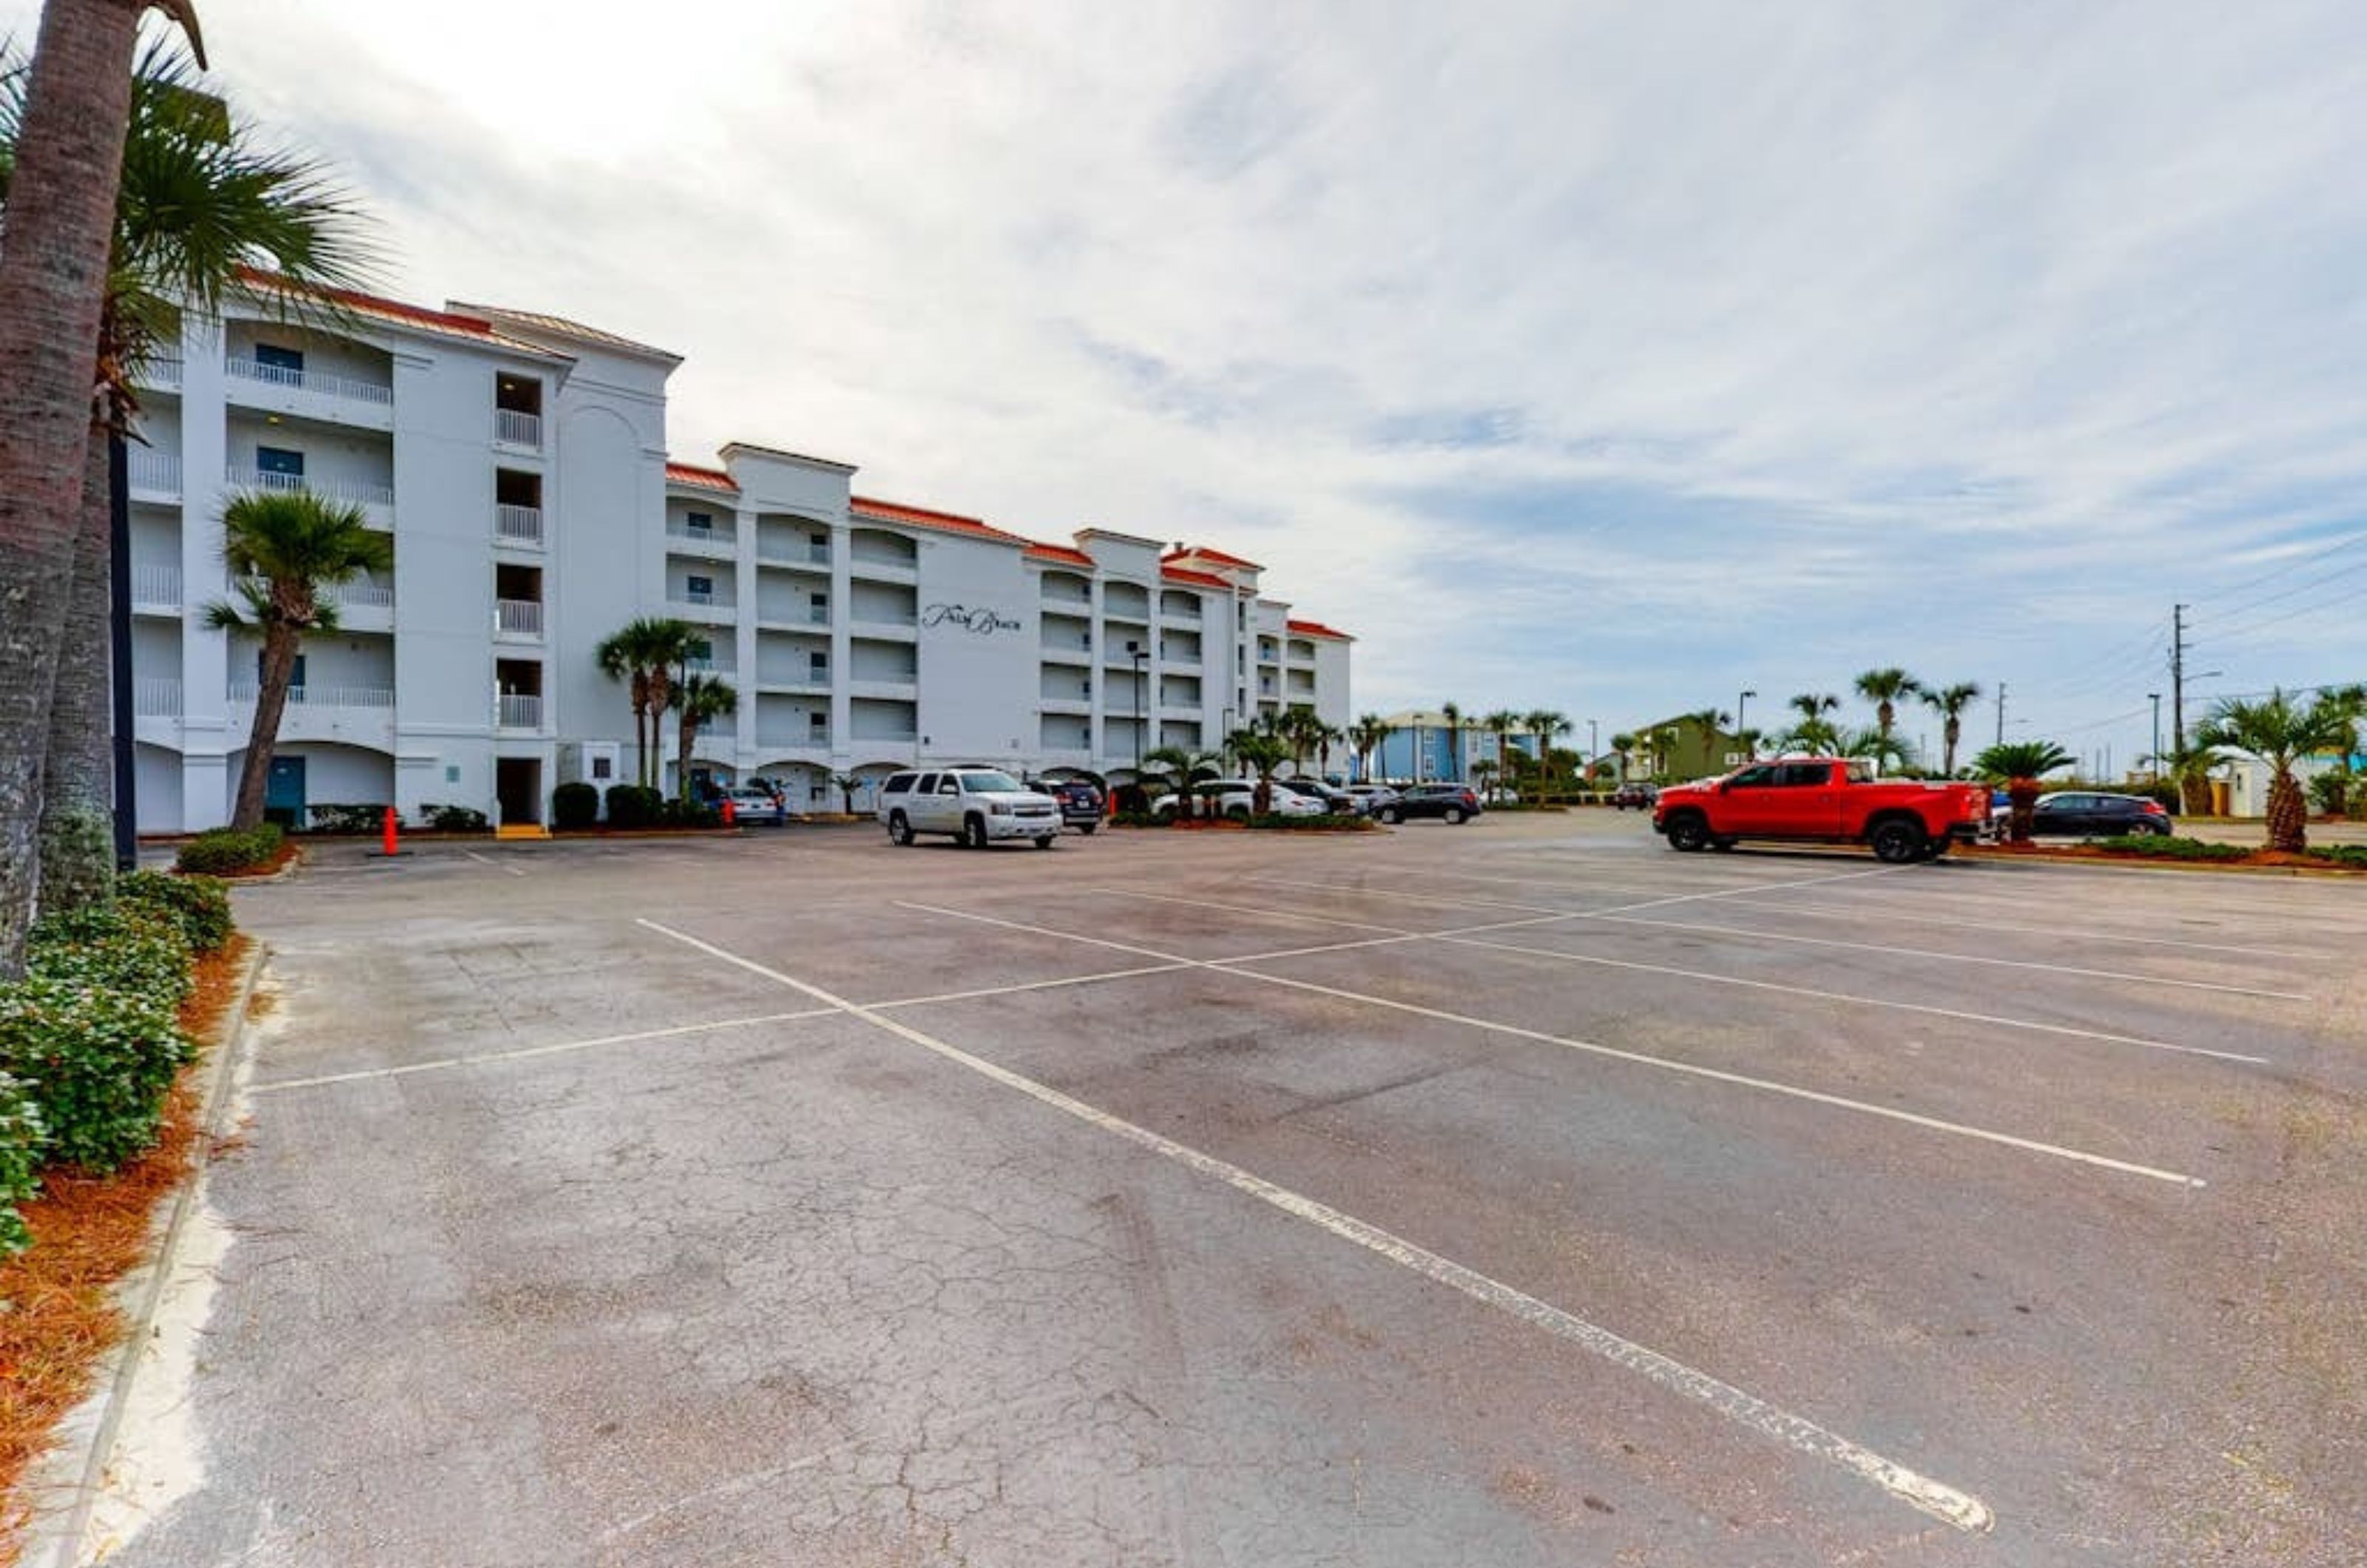 The parking lot in front of Palm Beach Condos in Orange Beach Alabama 